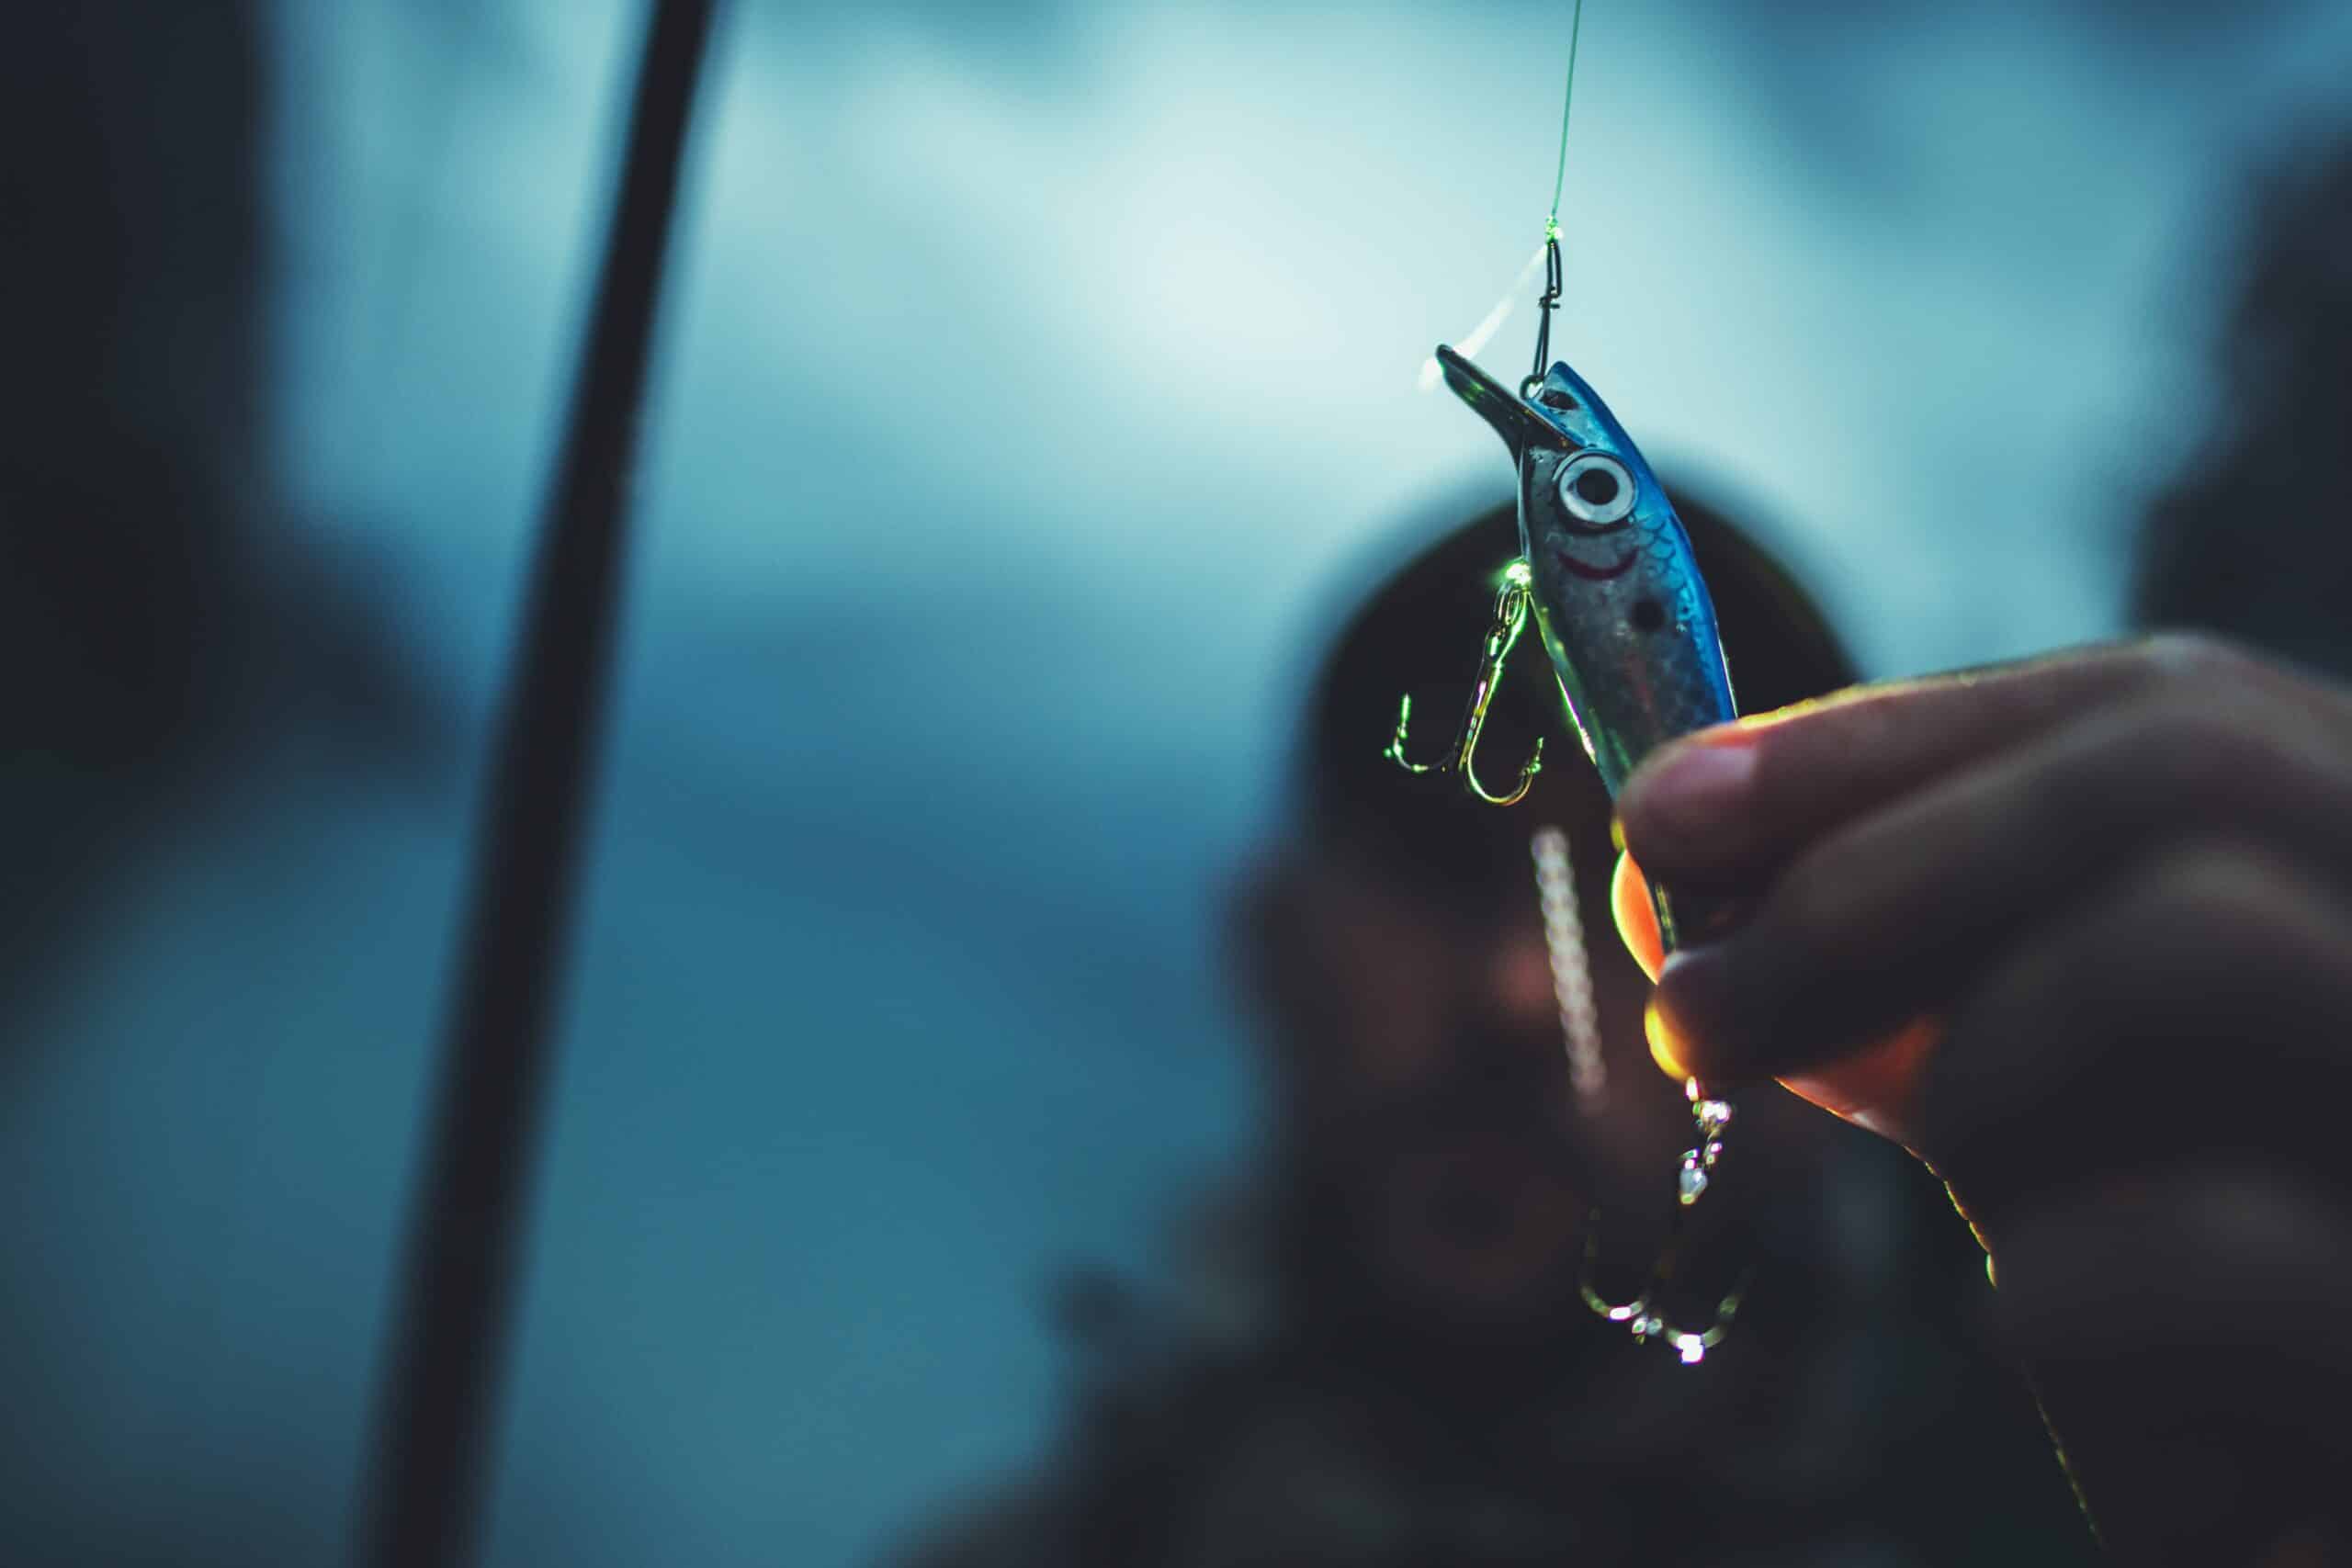 fanatic4fishing.com : What temperature should live bait be kept at?